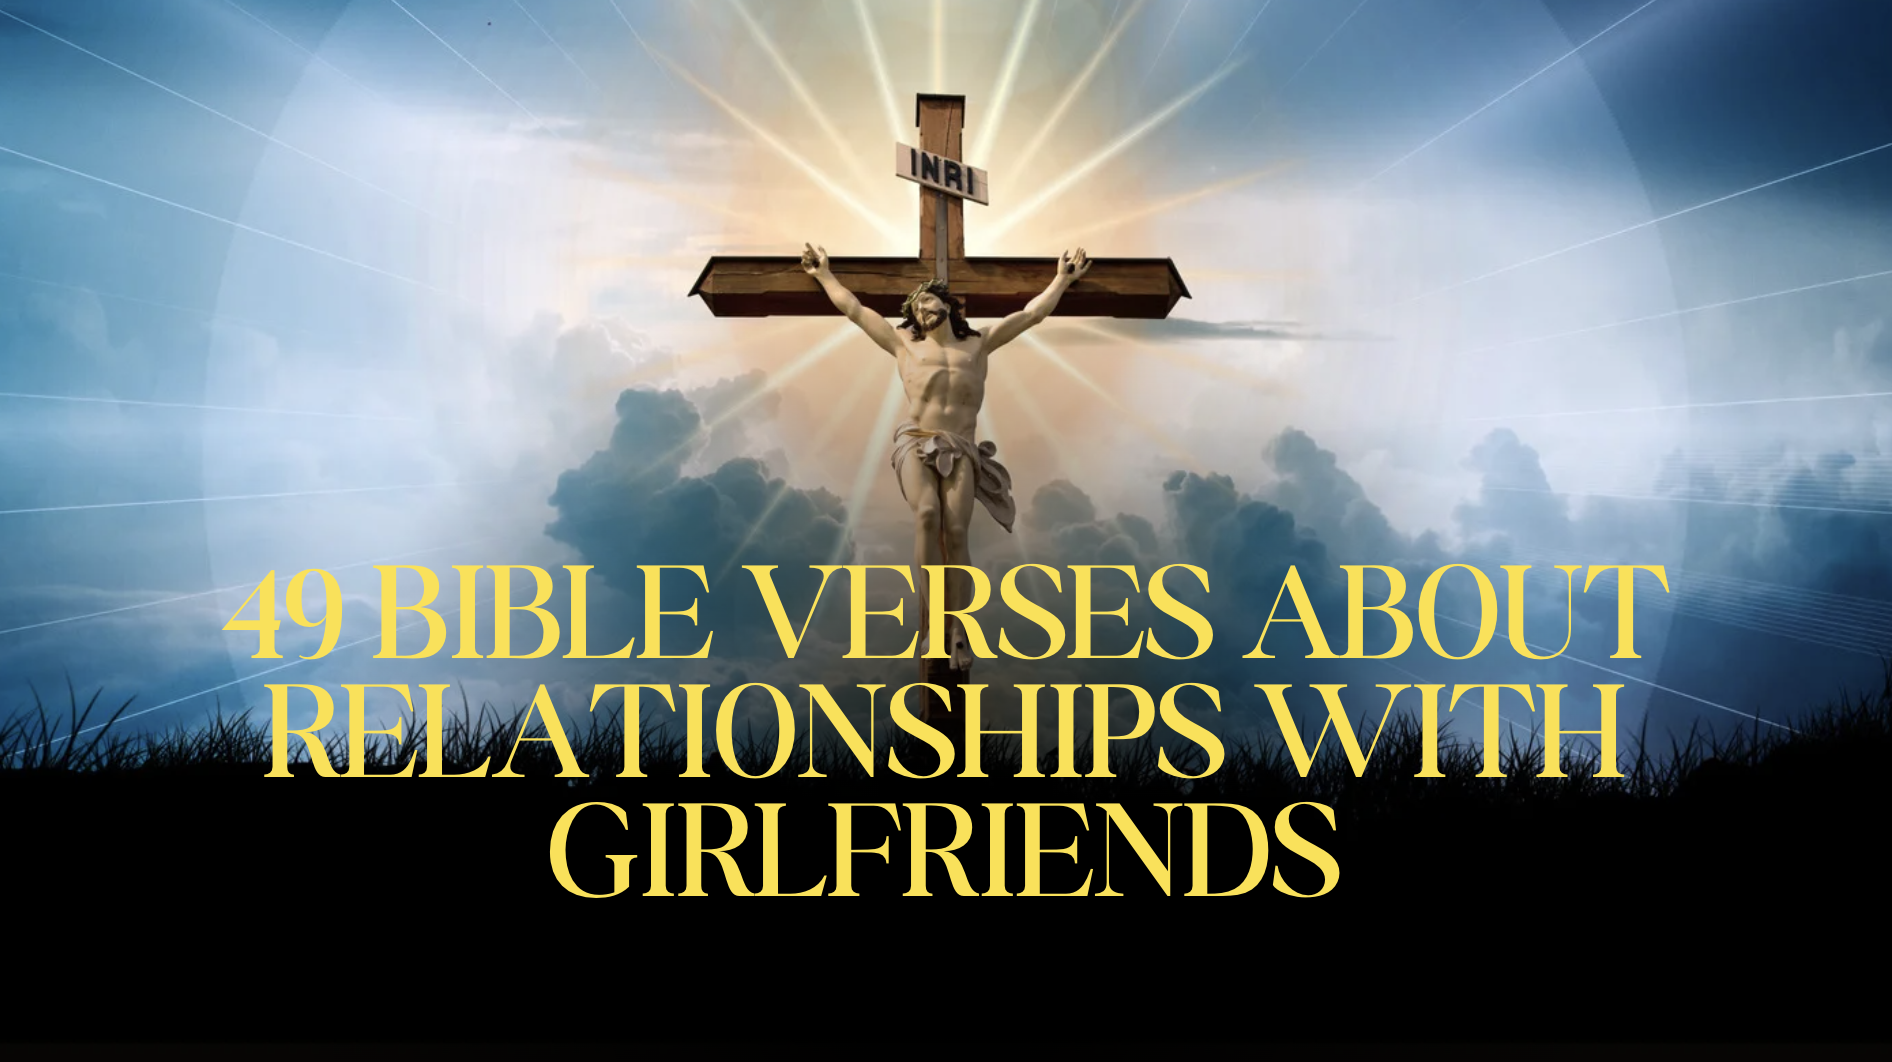 49 Bible Verses About Relationships With Girlfriends